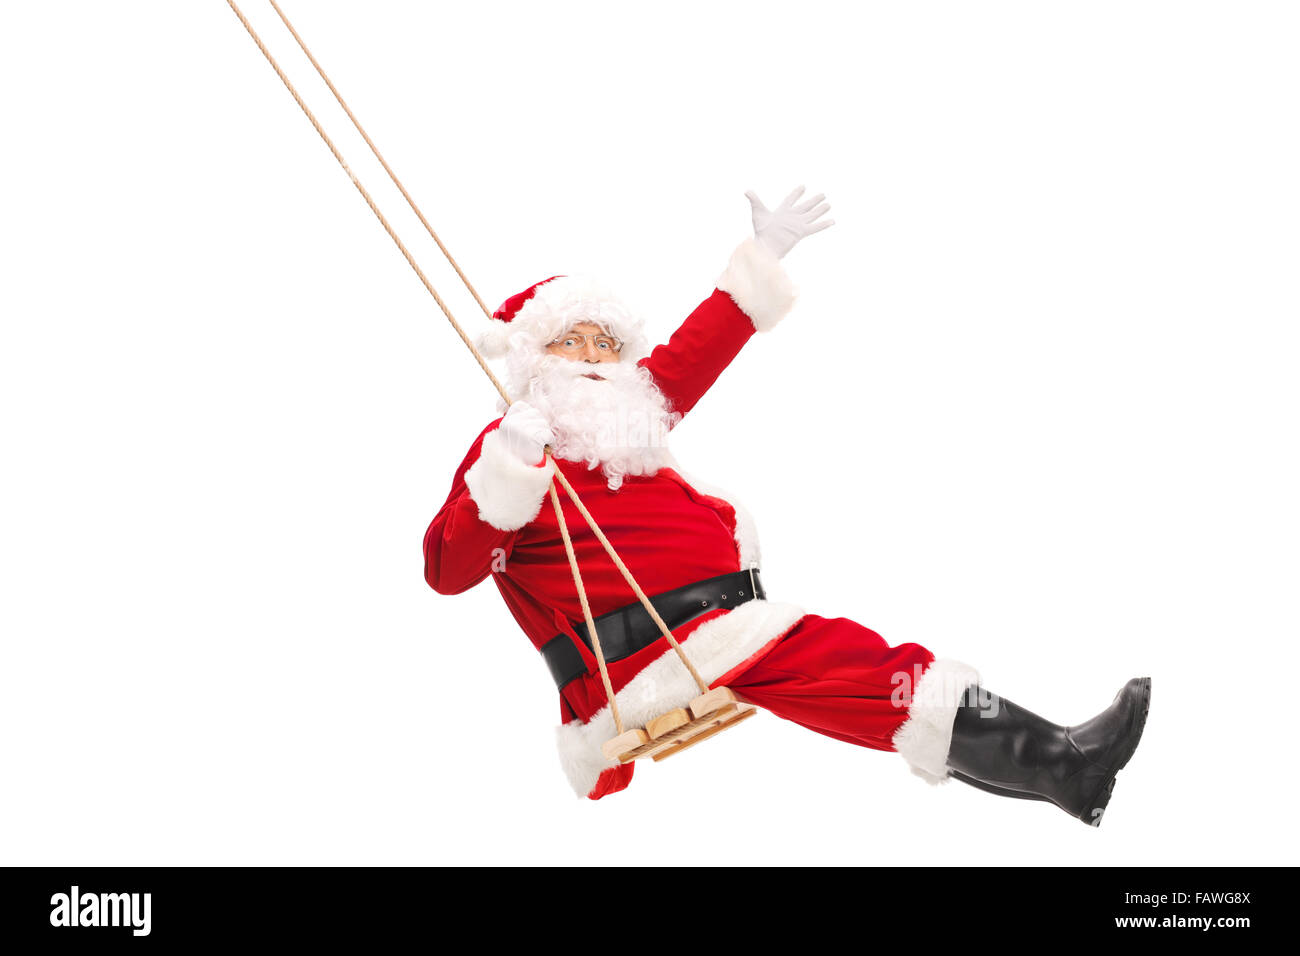 Full length profile shot of Santa Claus swinging on a wooden swing isolated  on white background Stock Photo - Alamy